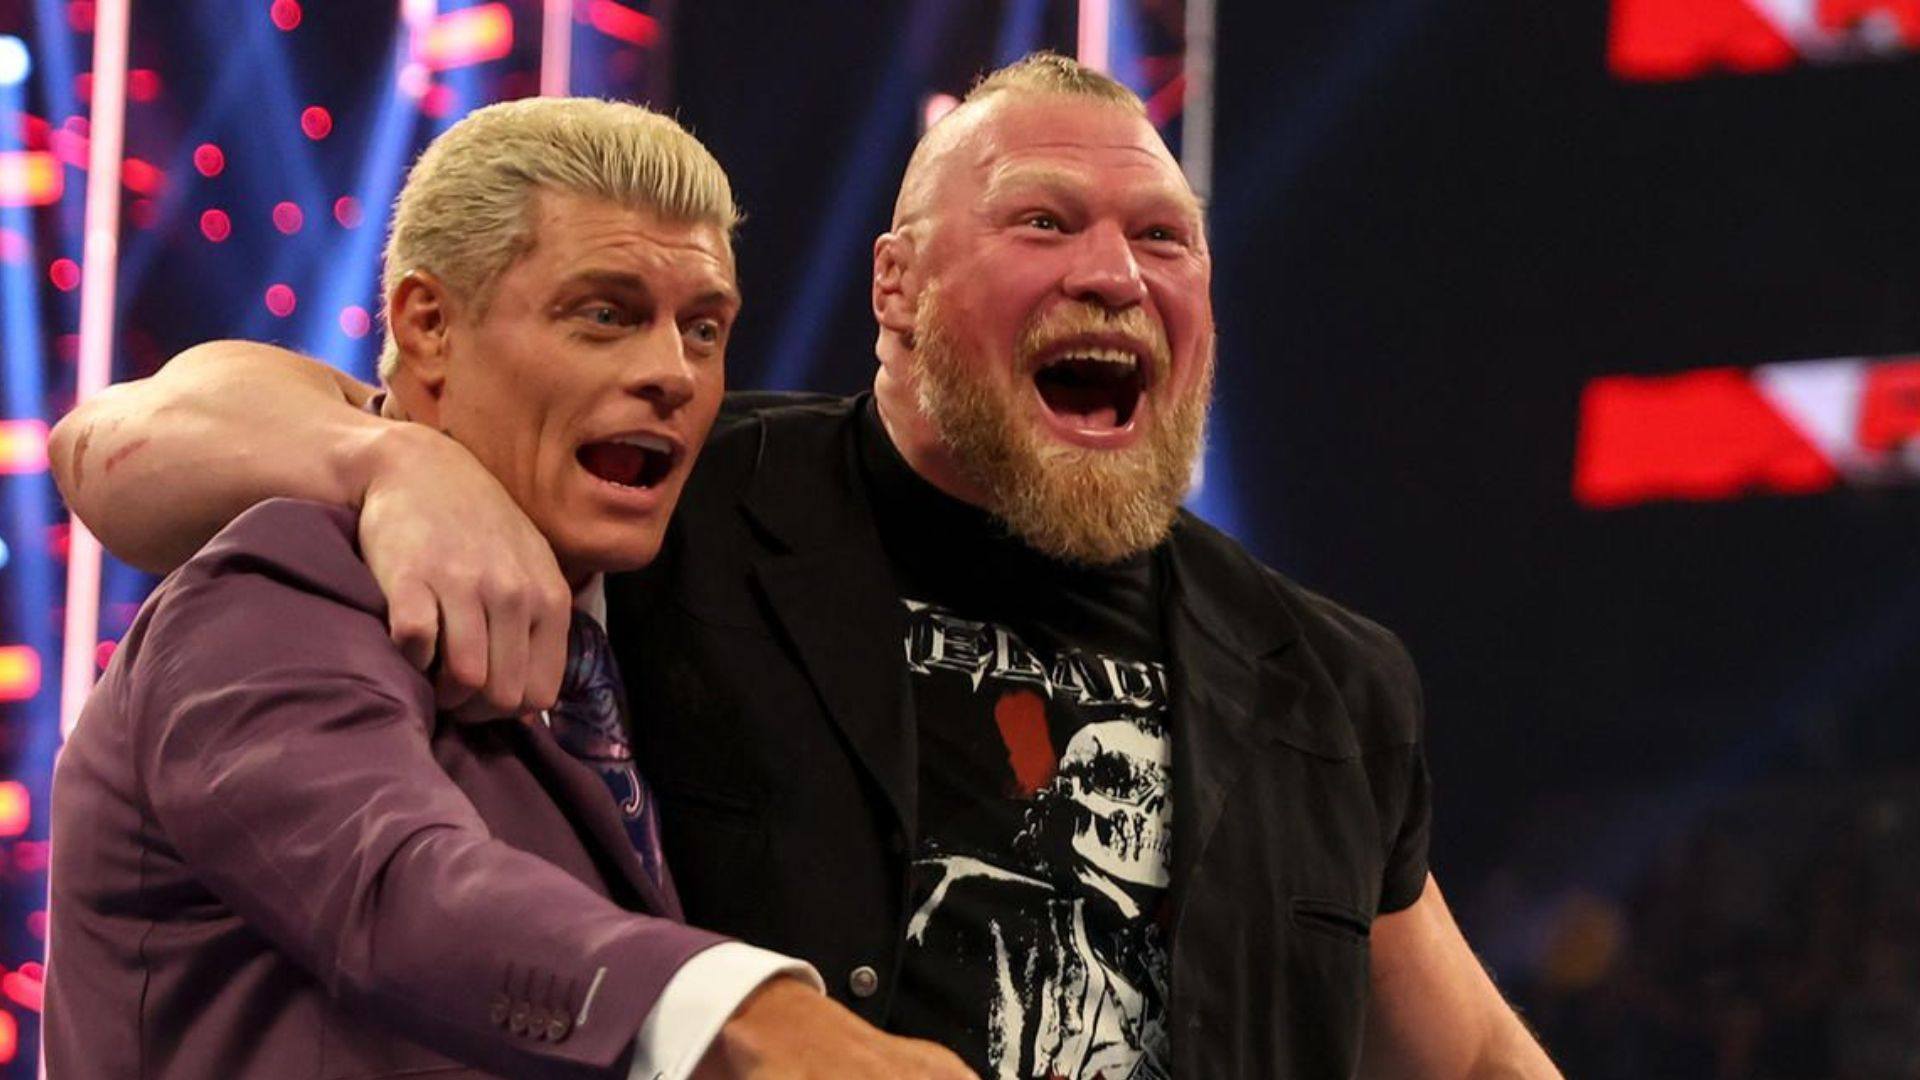 Cody Rhodes says Brock Lesnar is a ‘once in a lifetime individual’